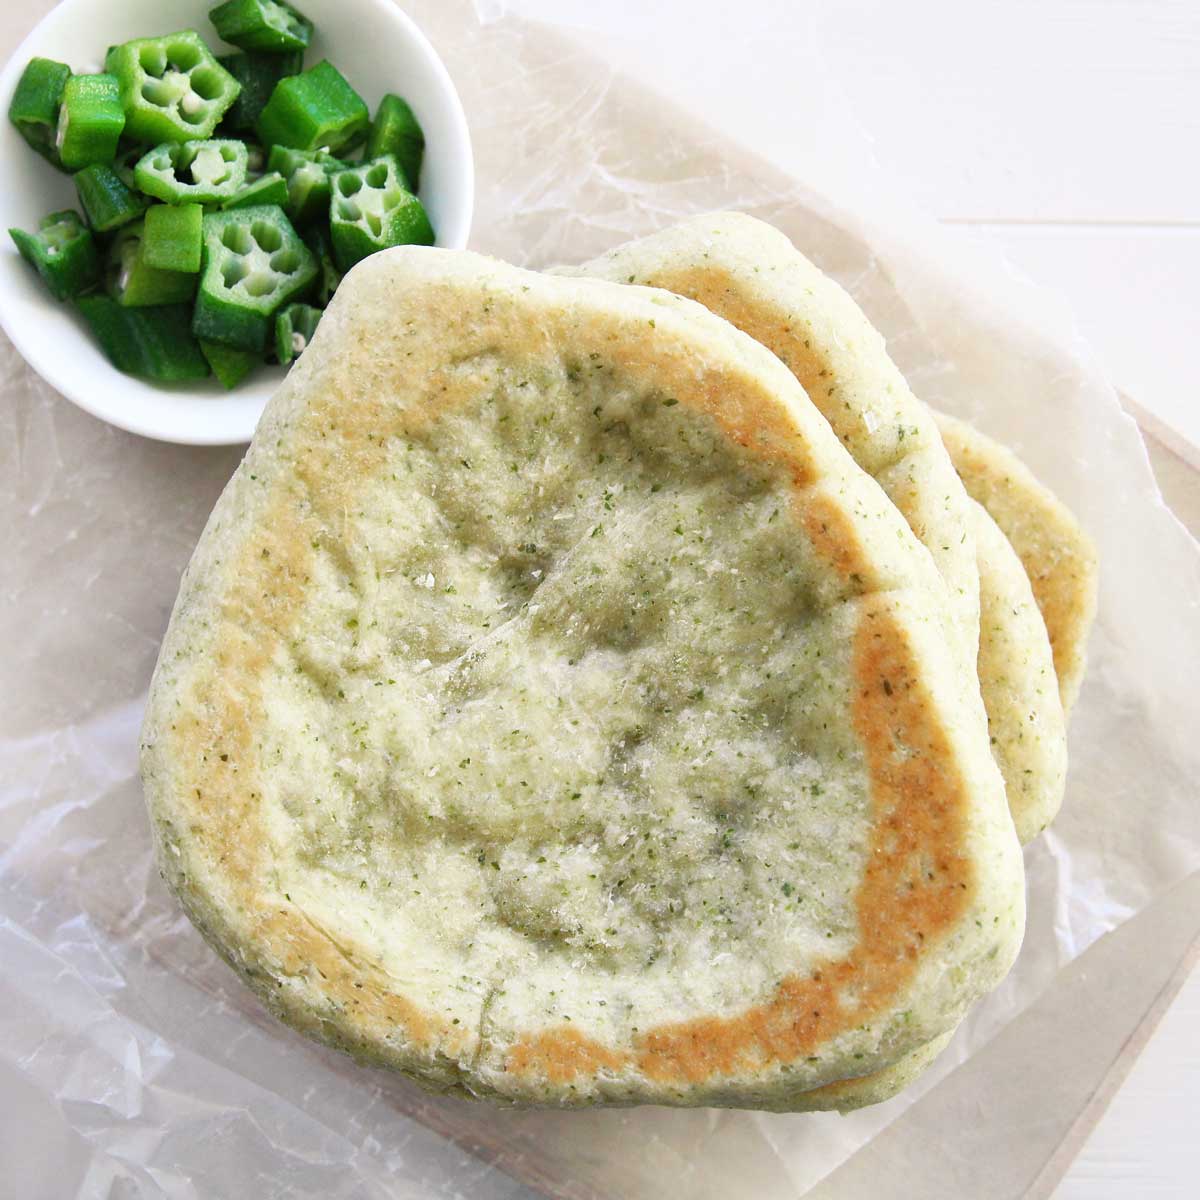 Quick & Easy Okra Flatbread (Naan) Made in the Food Processor - Sweet Matcha Whipped Cream